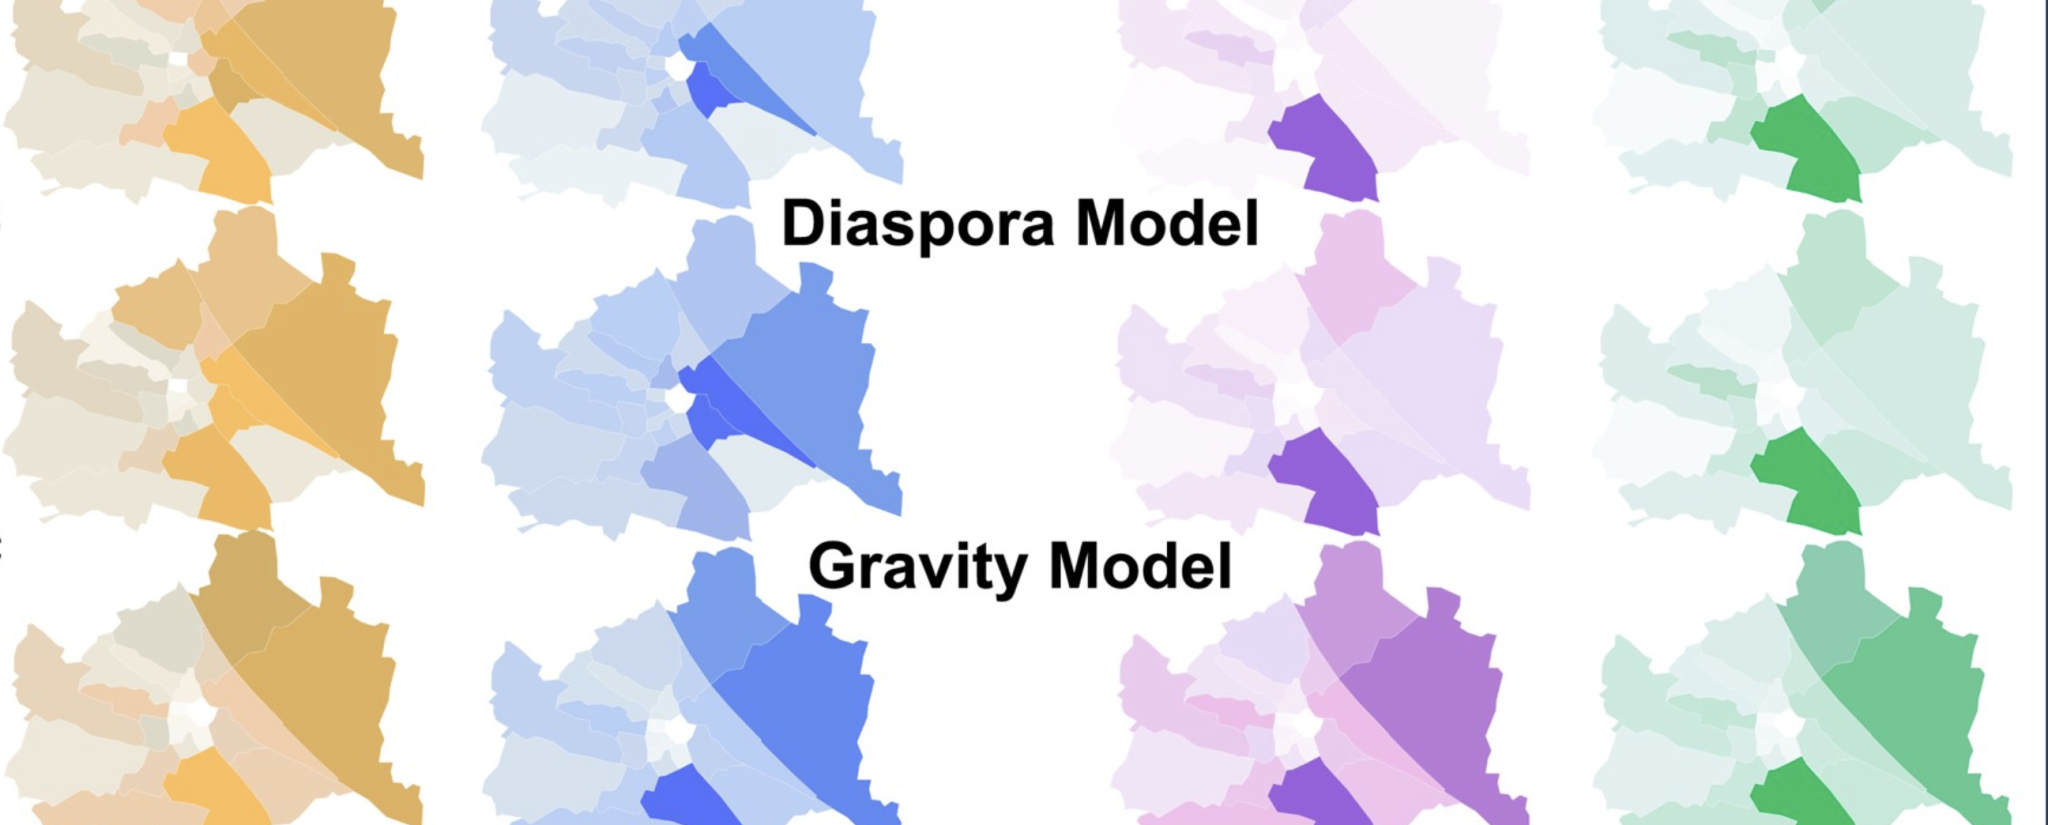 The diaspora model for human migration. Vienna model results (c) Complexity Science Hub